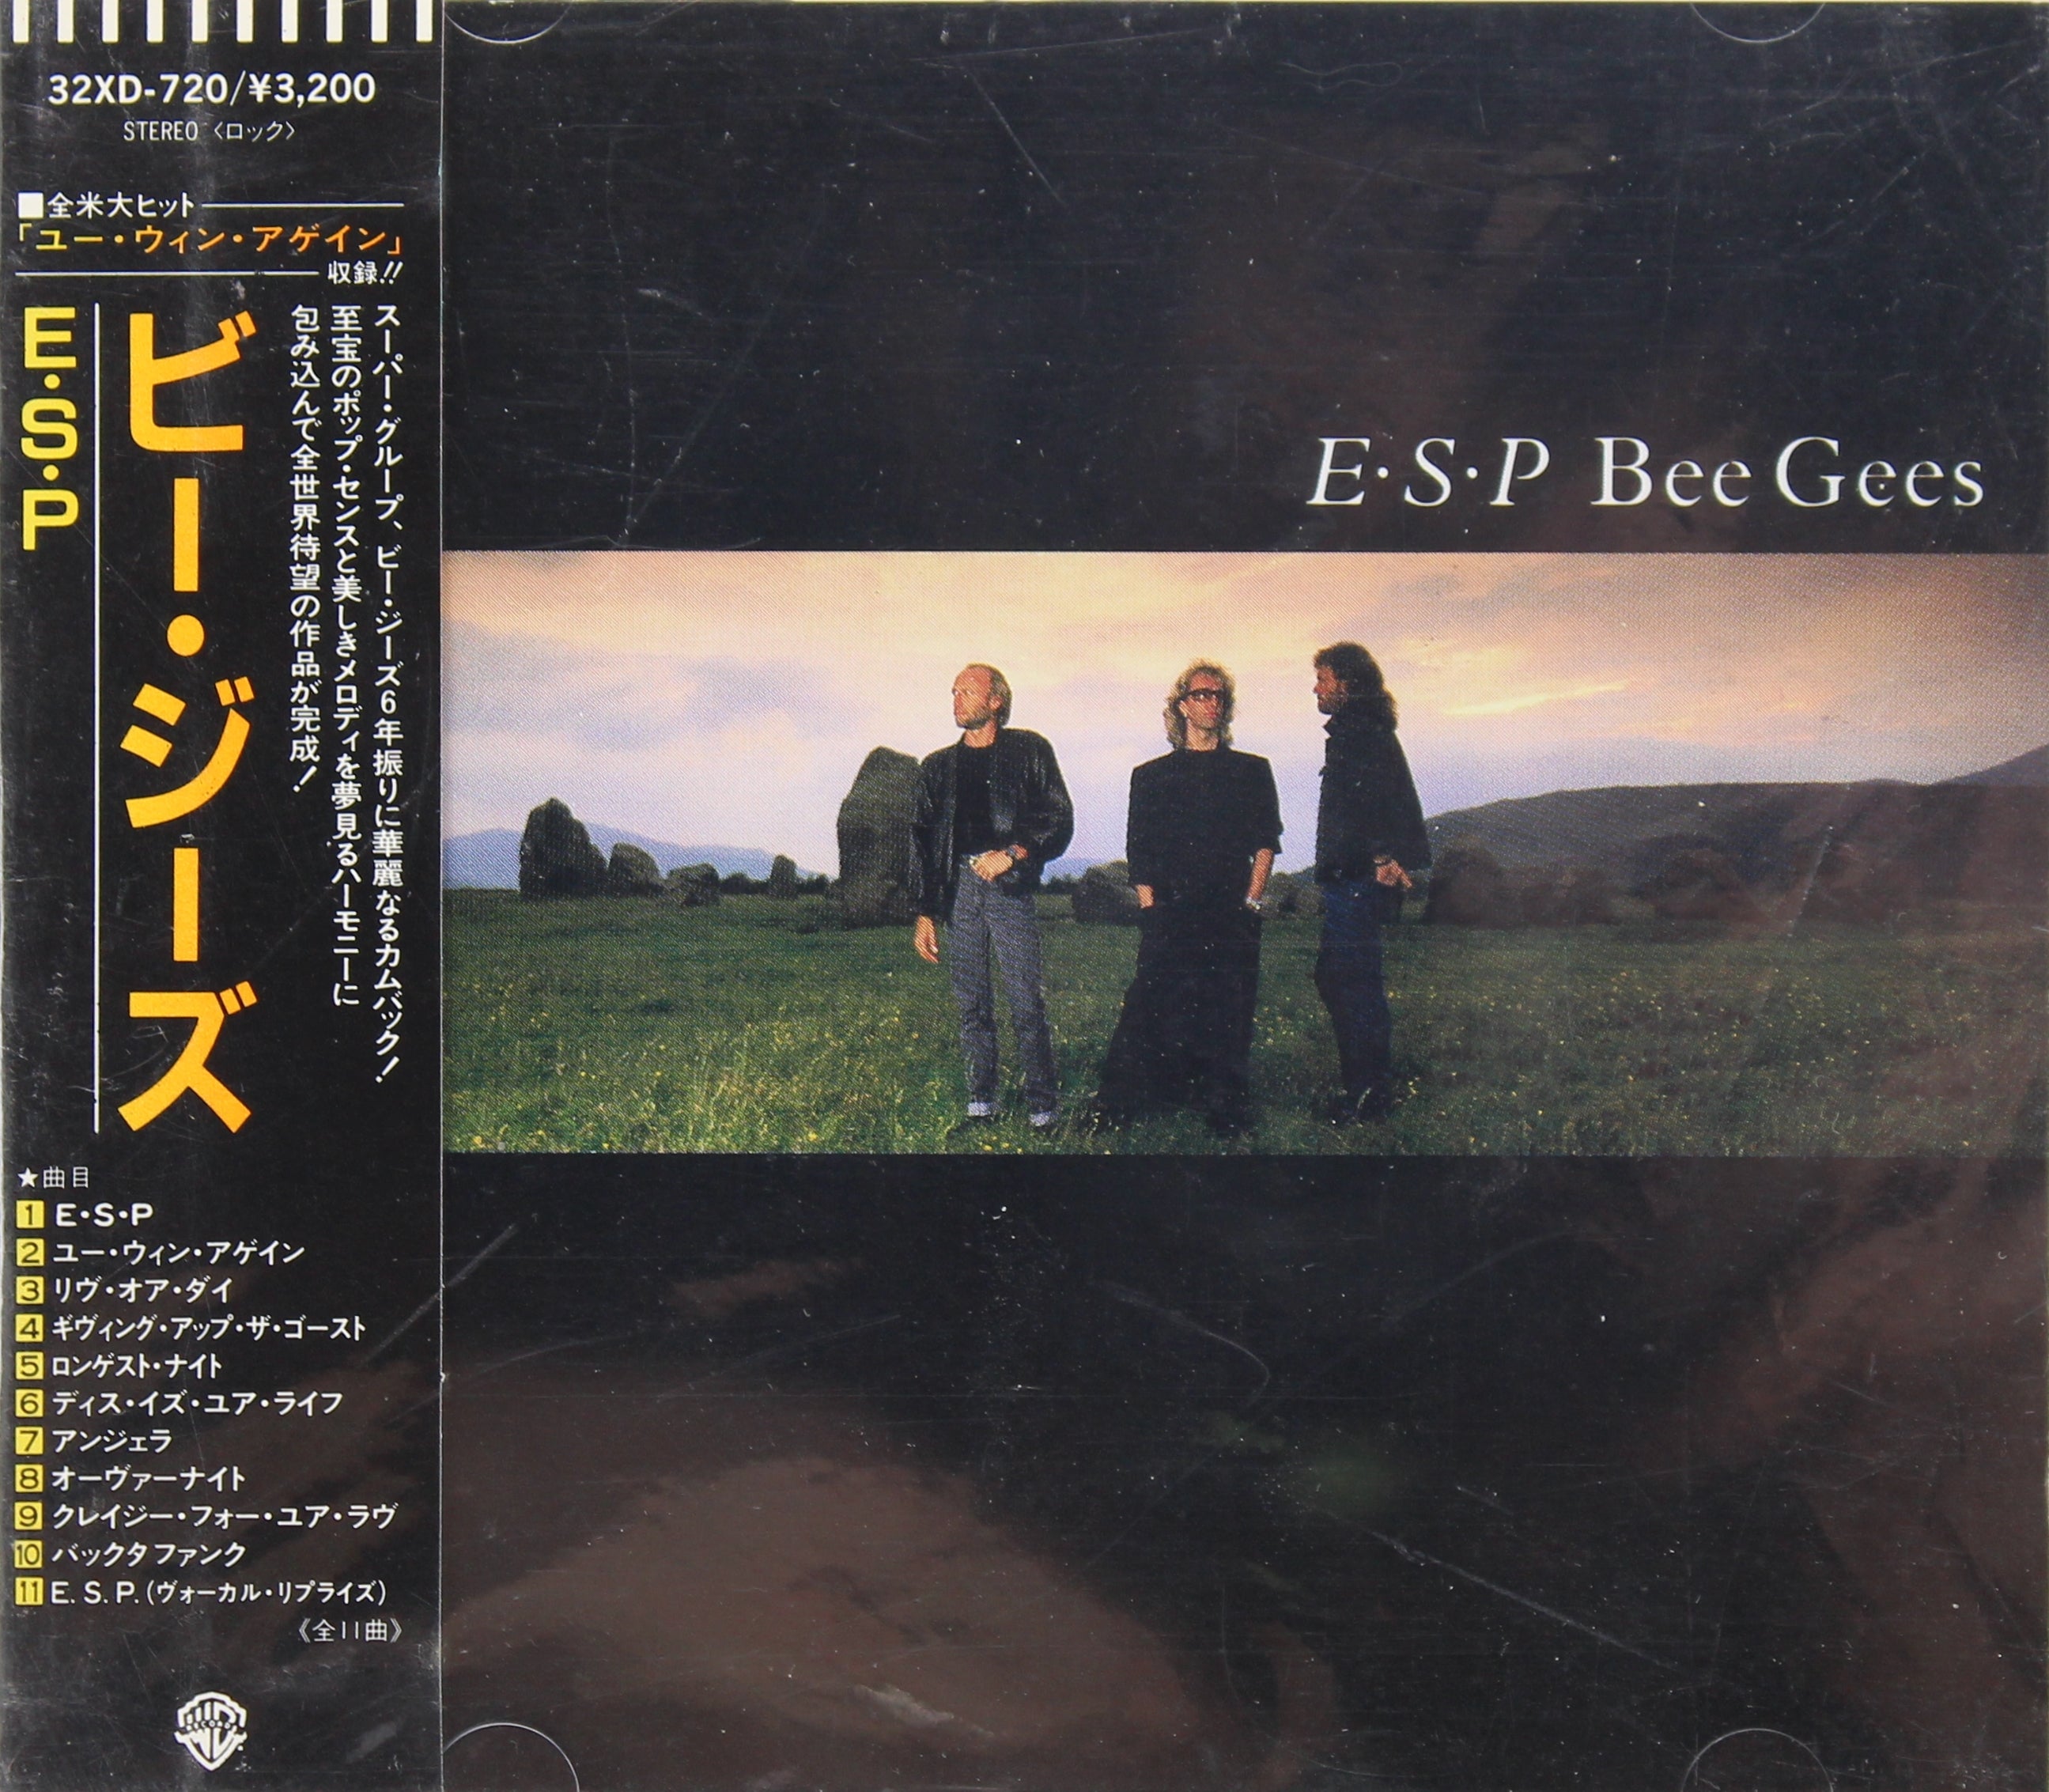 8cm CD☆BEE GEES／ビー・ジーズ／ユー・ウィン・アゲイン／E・S・P-